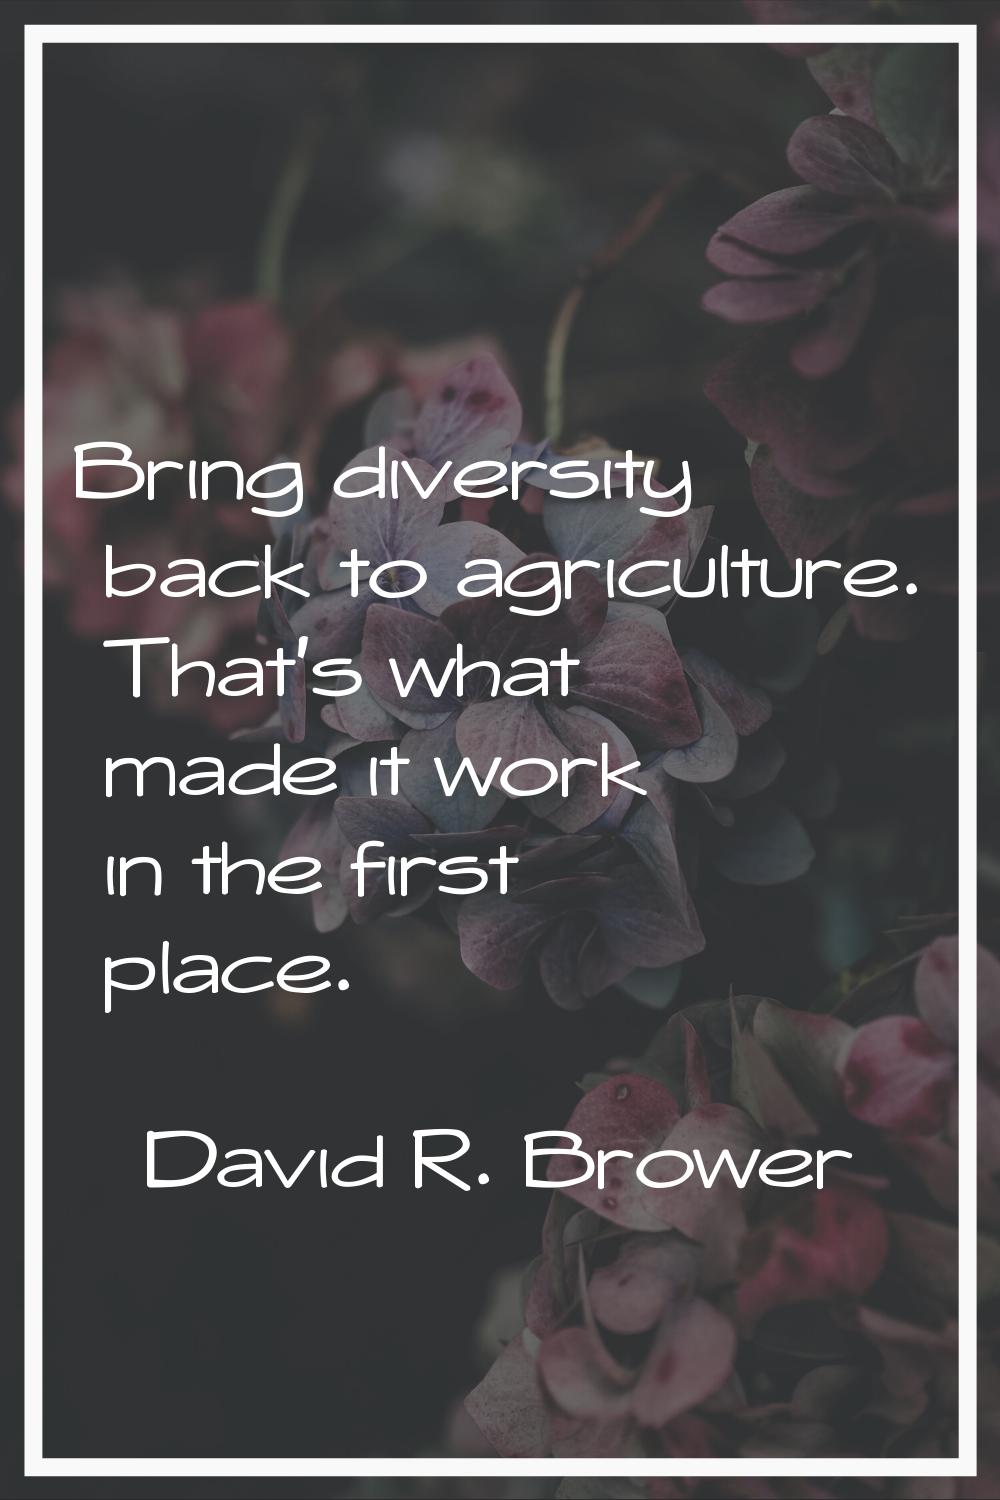 Bring diversity back to agriculture. That's what made it work in the first place.